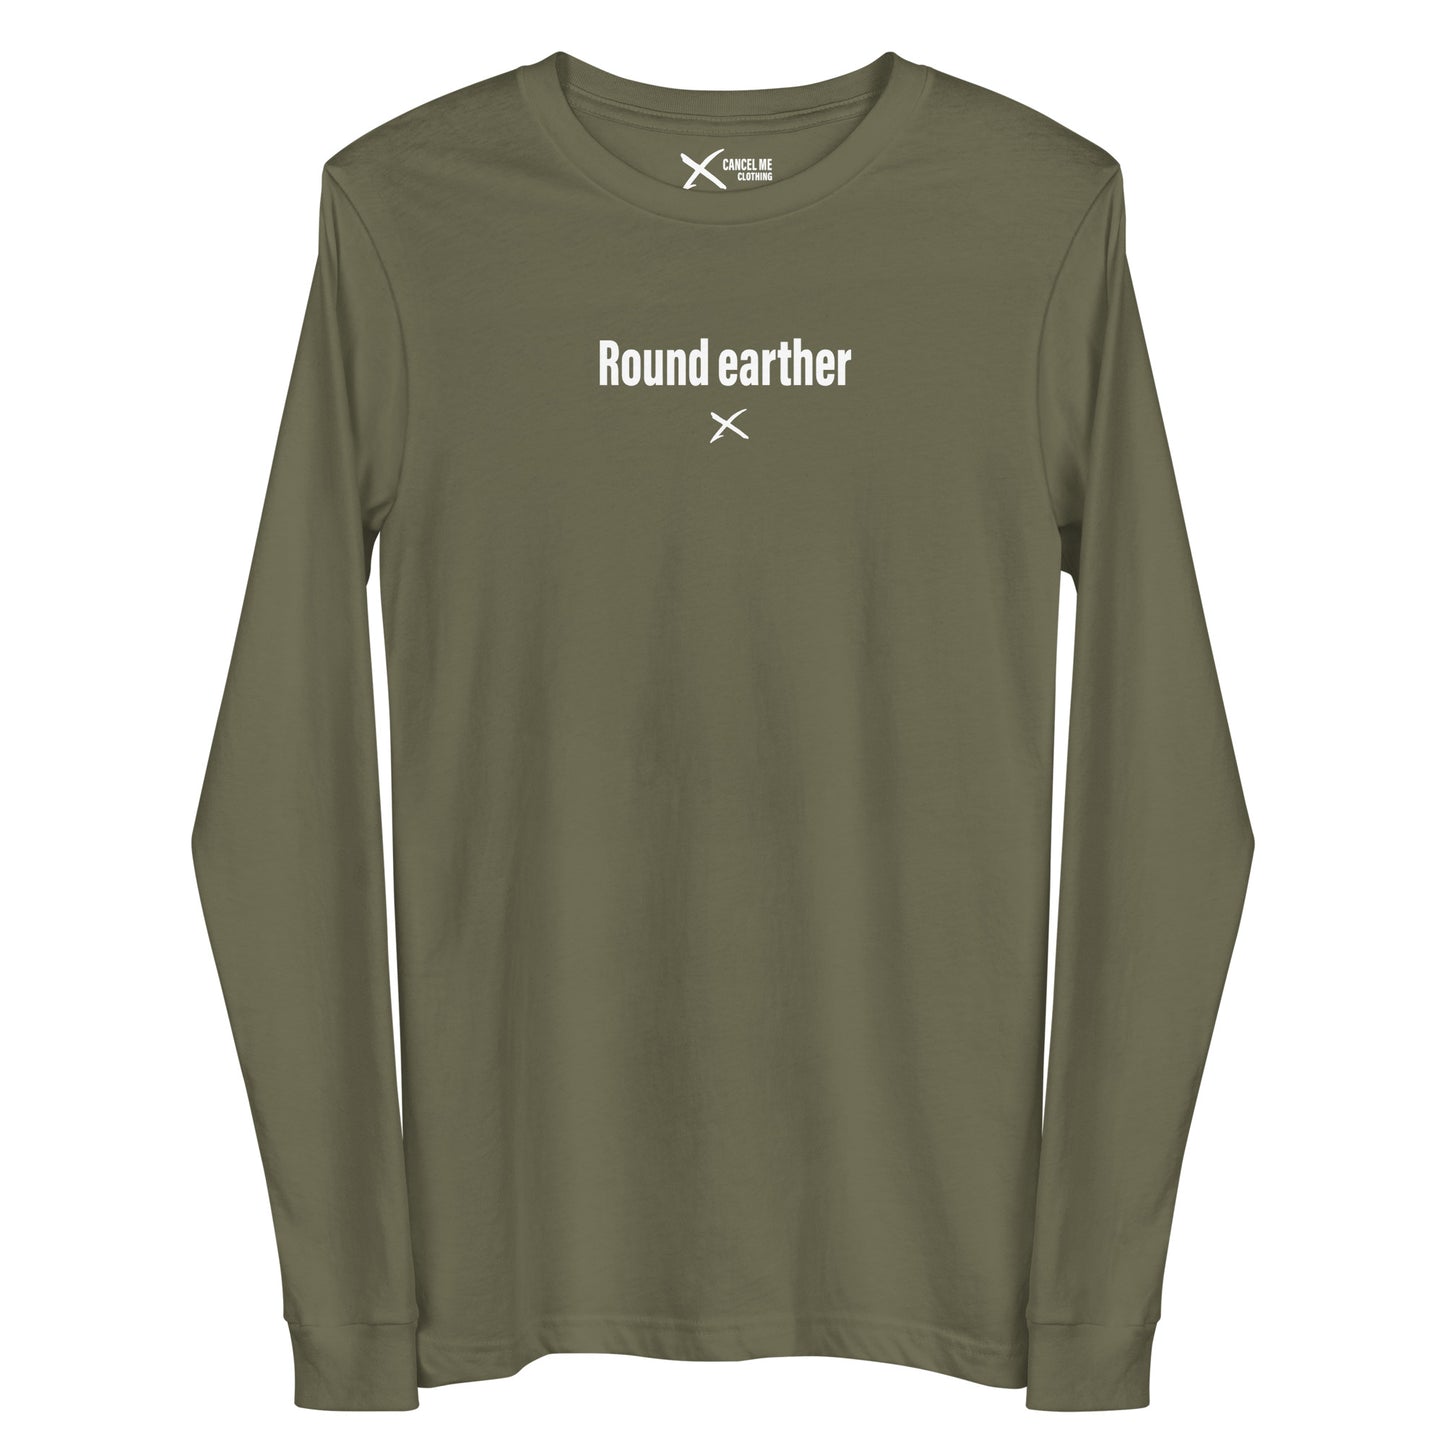 Round earther - Longsleeve